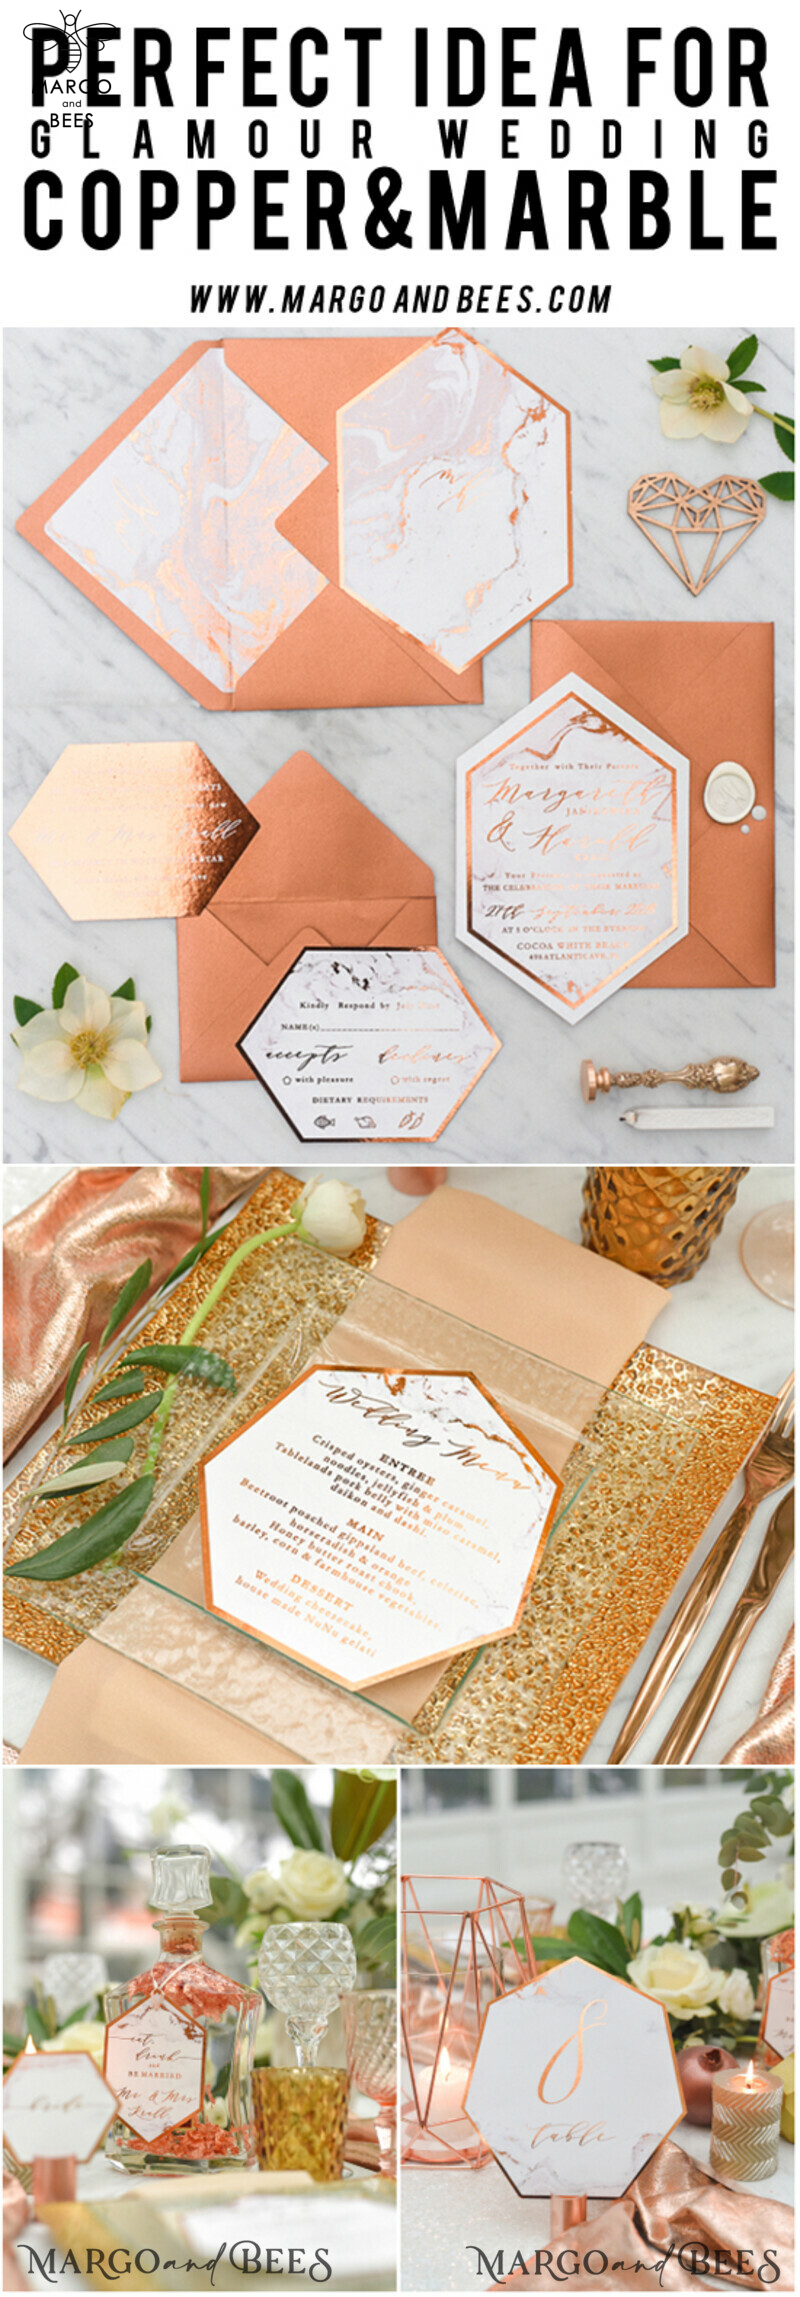 Luxury Copper Marble Wedding Invitations: Glamour and Elegance Combined
Glamour Glitter Wedding Invites: Sparkling and Sophisticated
Elegant Geometric Wedding Cards: Modern and Chic Stationery
Bespoke Orange Wedding Stationery: Customized and Vibrant Designs-9